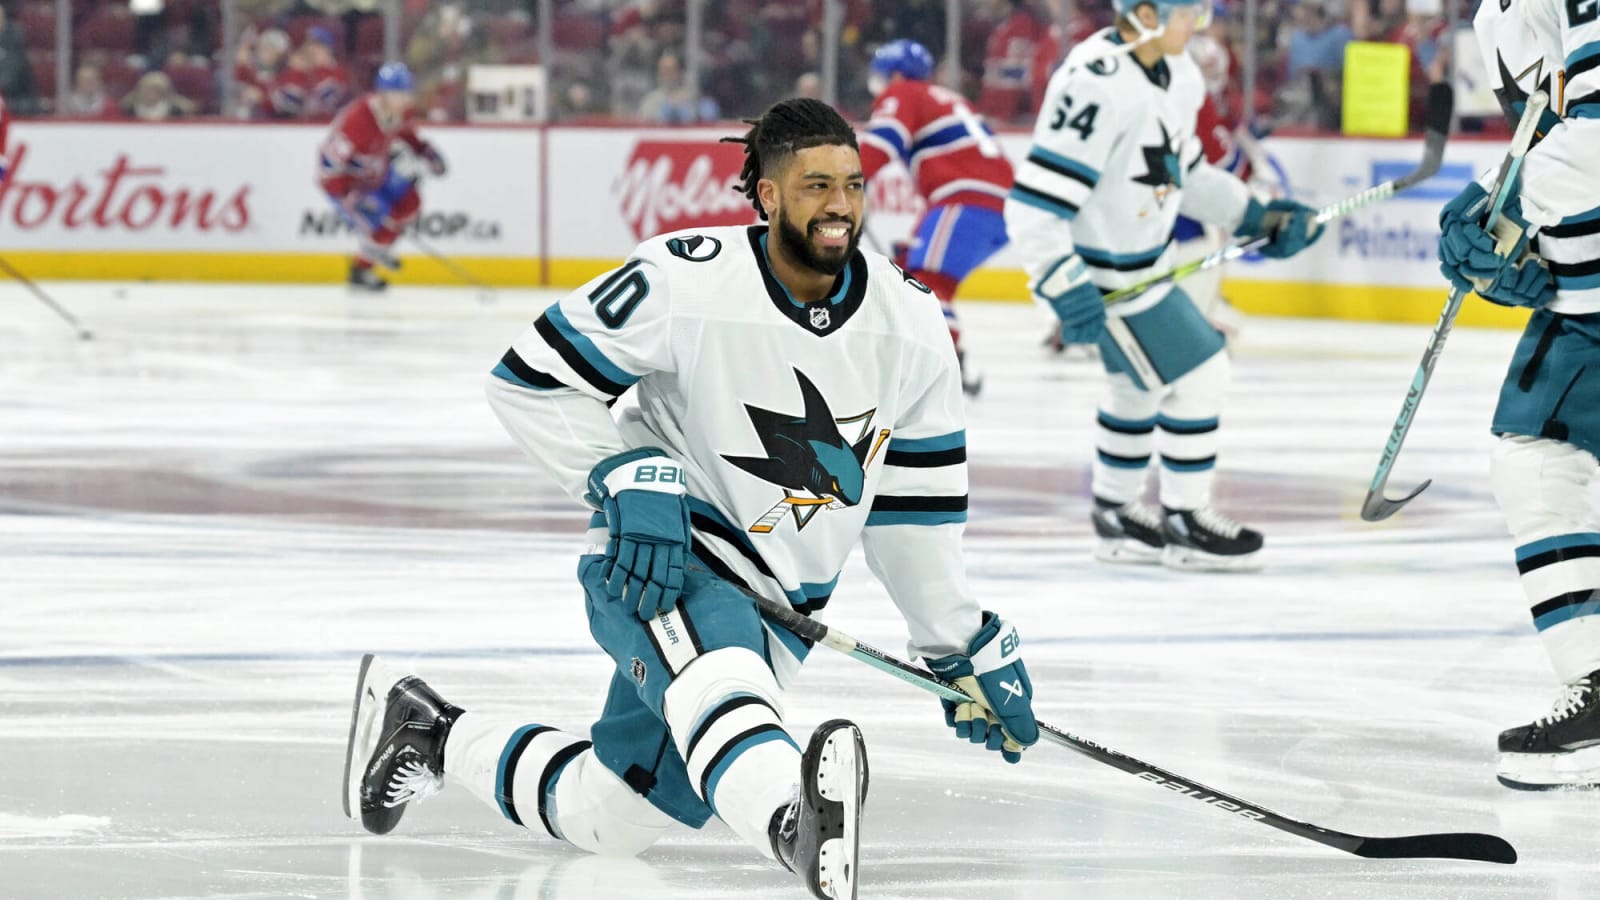 Sharks Lose Game With 5 Seconds Left, 5-4